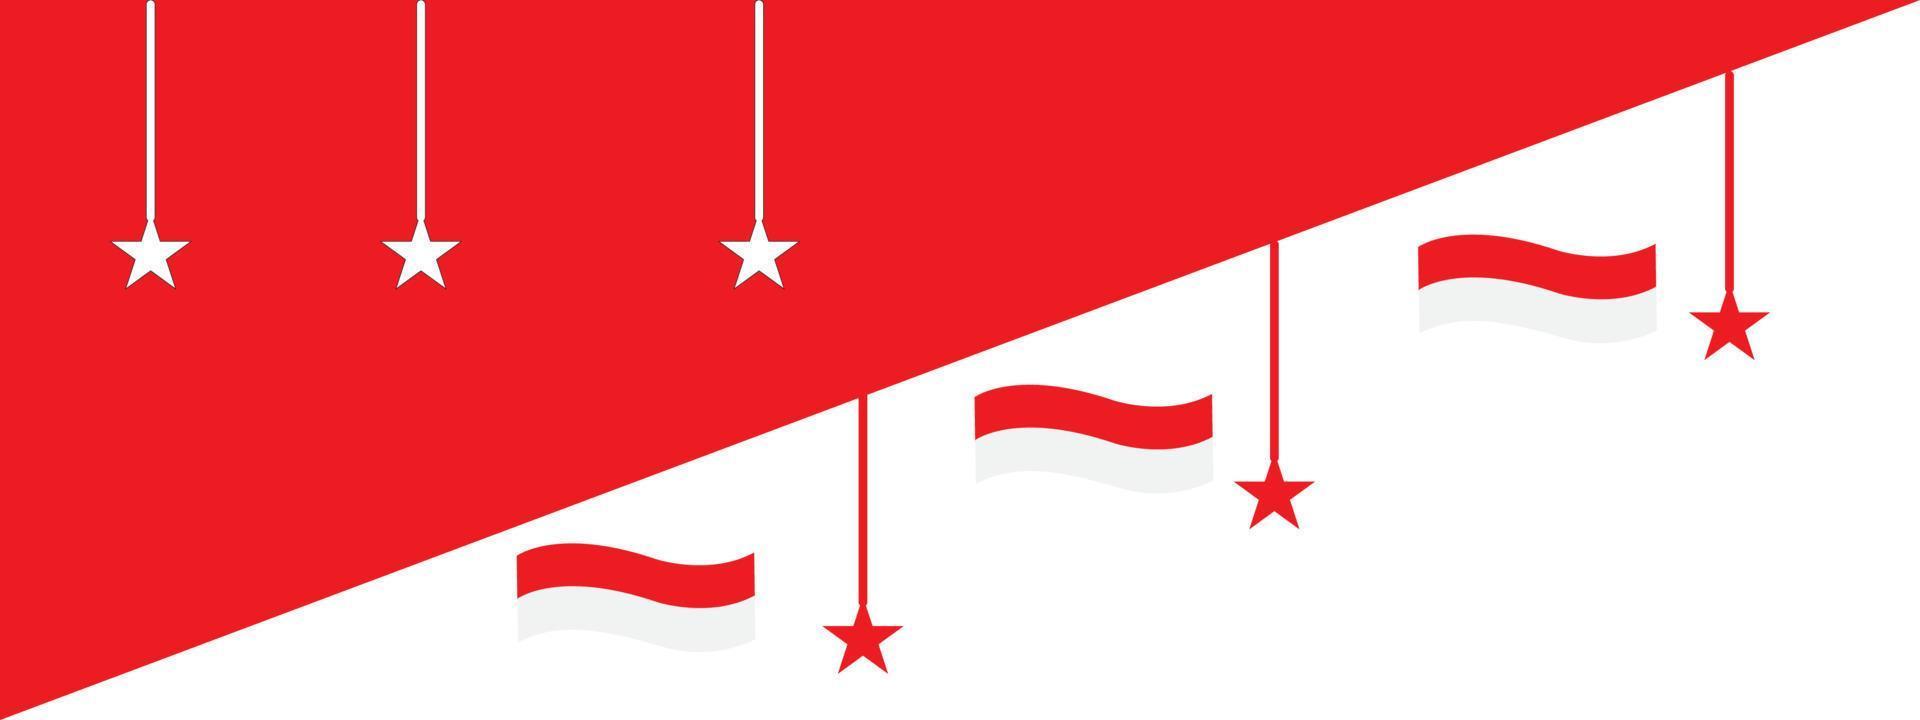 Free Indonesian flag background with stars. vector